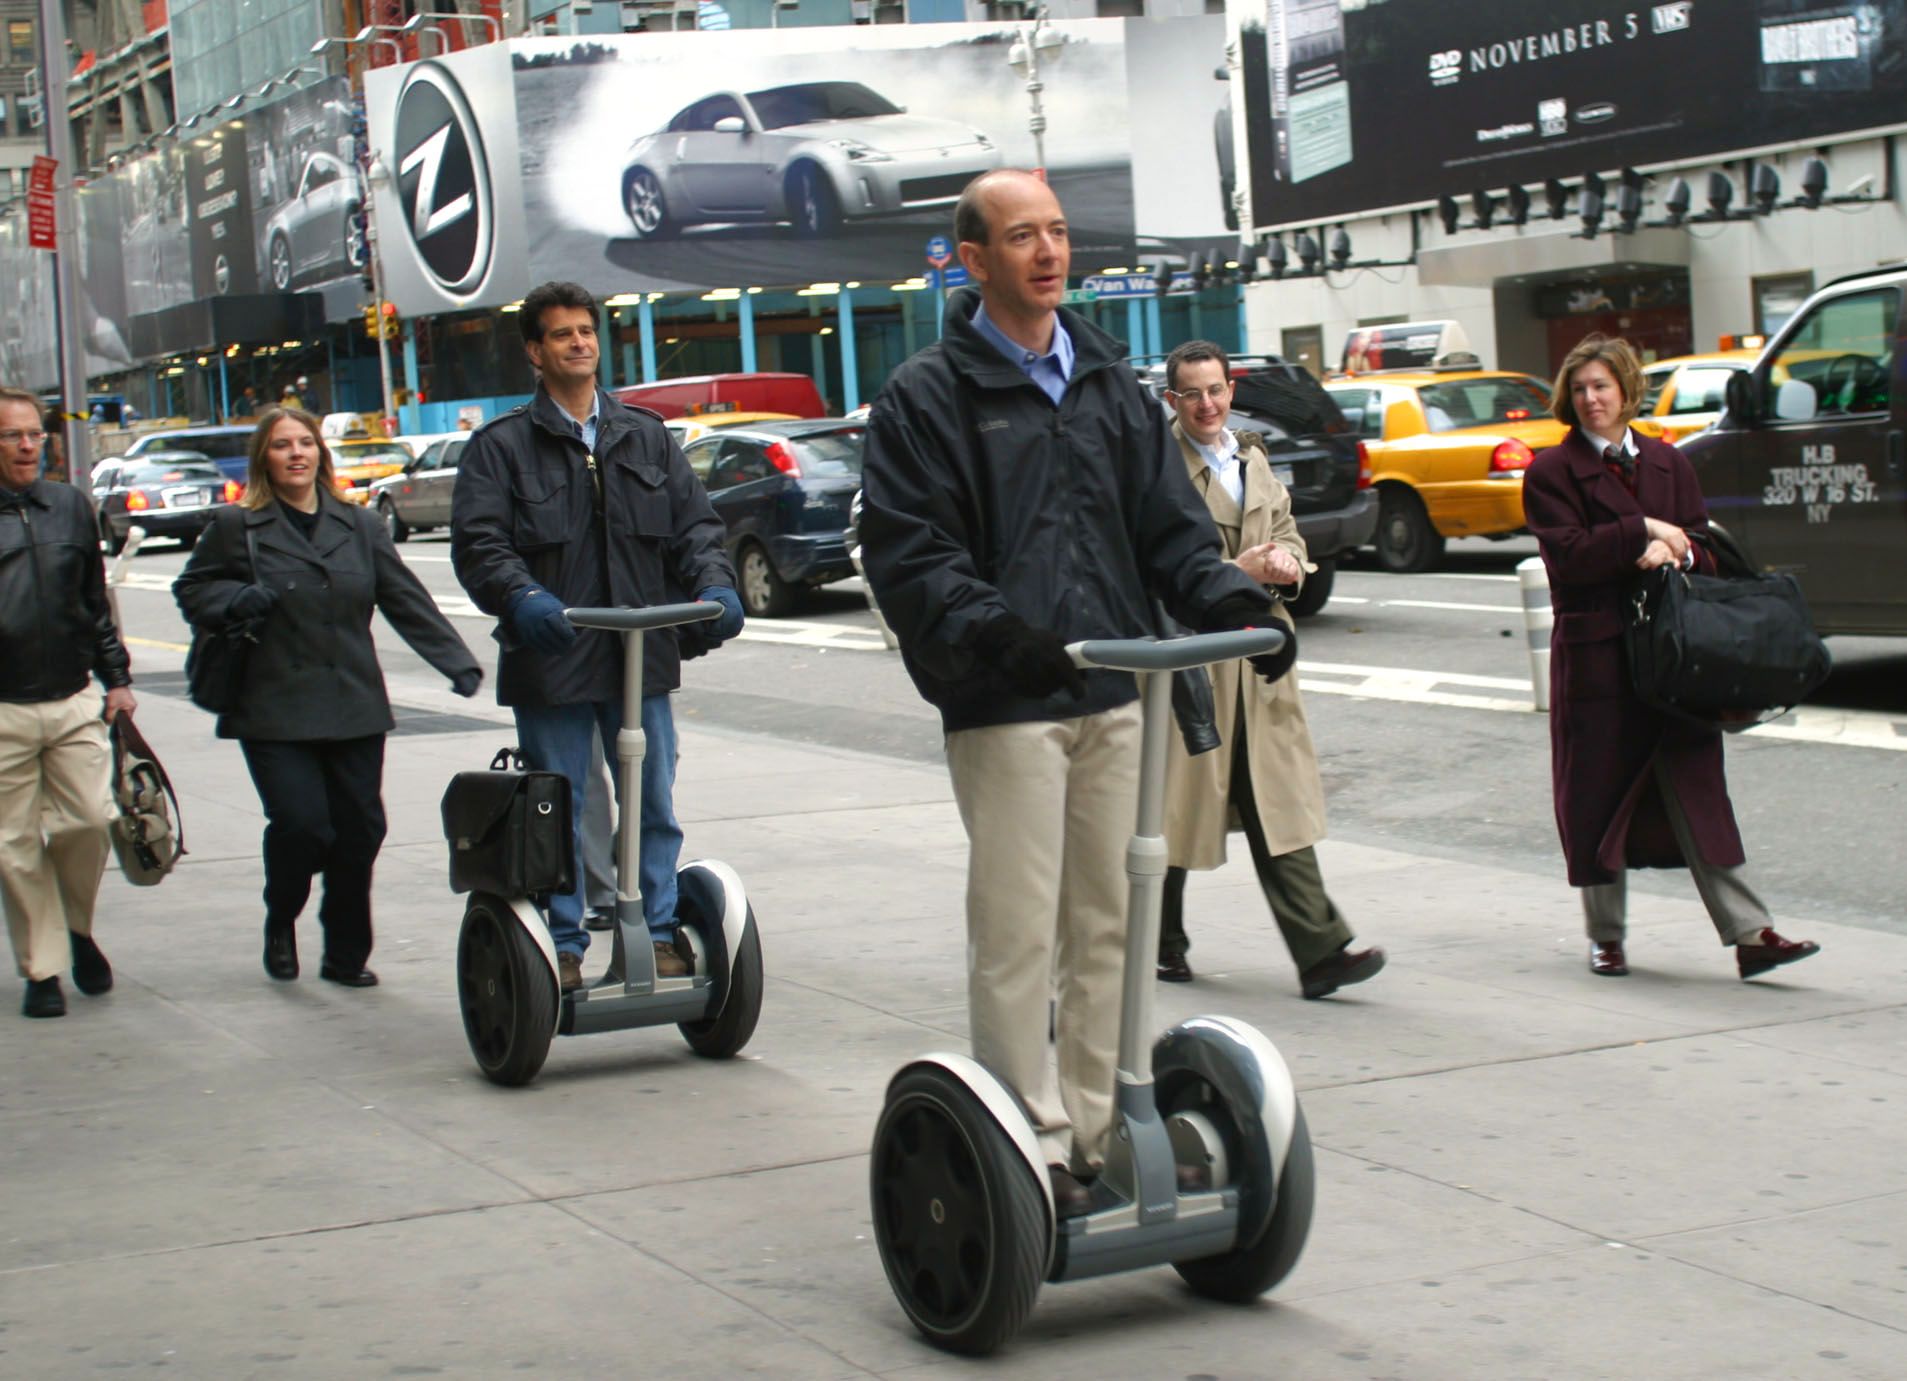 Kings of the road: Amazon&nbsp;founder Jeff Bezos (front) tries out a Segway with&nbsp;inventor Dean Kamen&nbsp;in New York's Times Square in 2002.&nbsp;